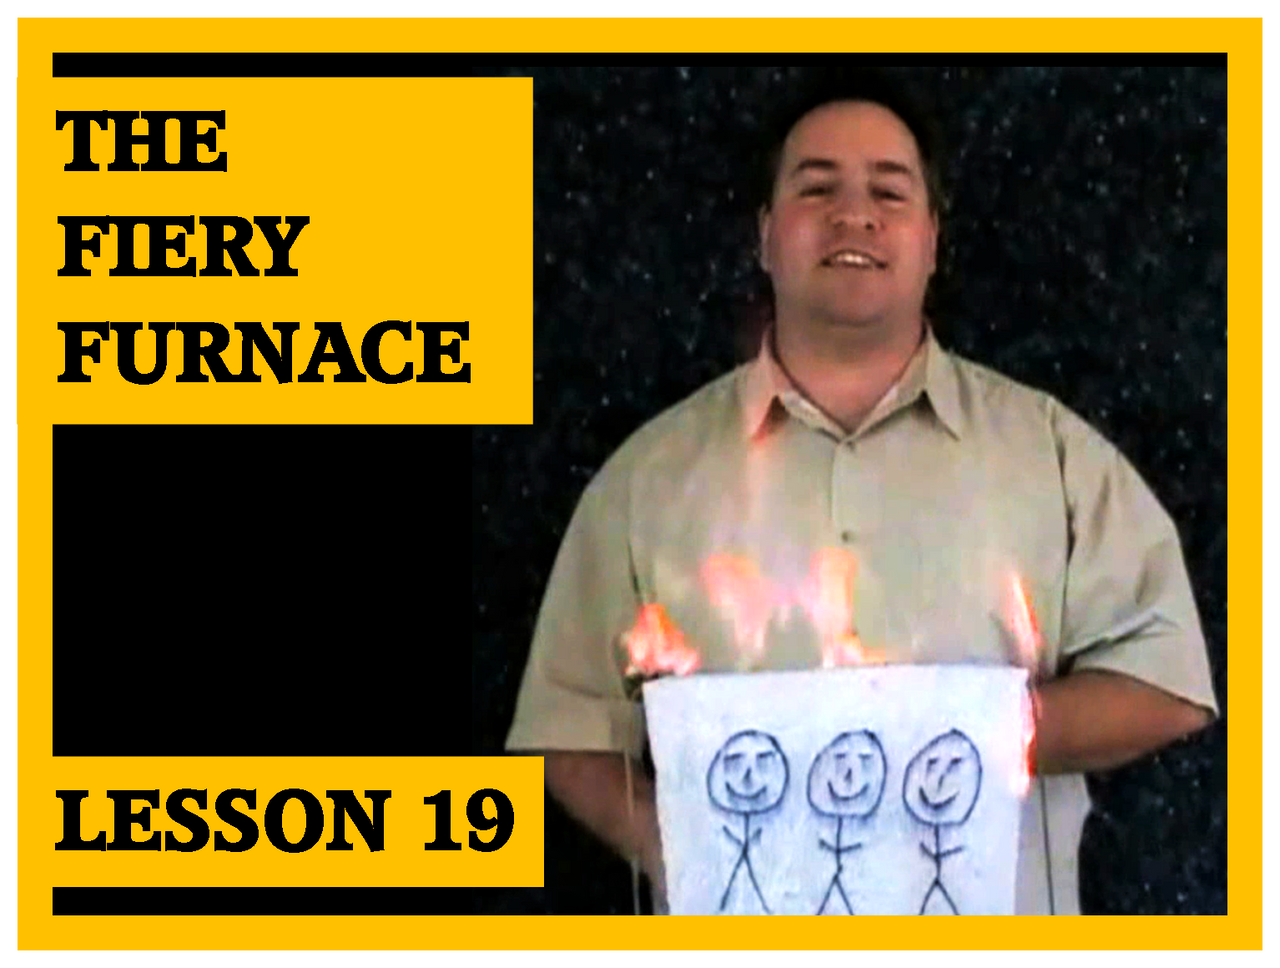 Gospel Magic Lesson Trick 19 - The Fiery Furnace - Staying Faithful to God in hard times 